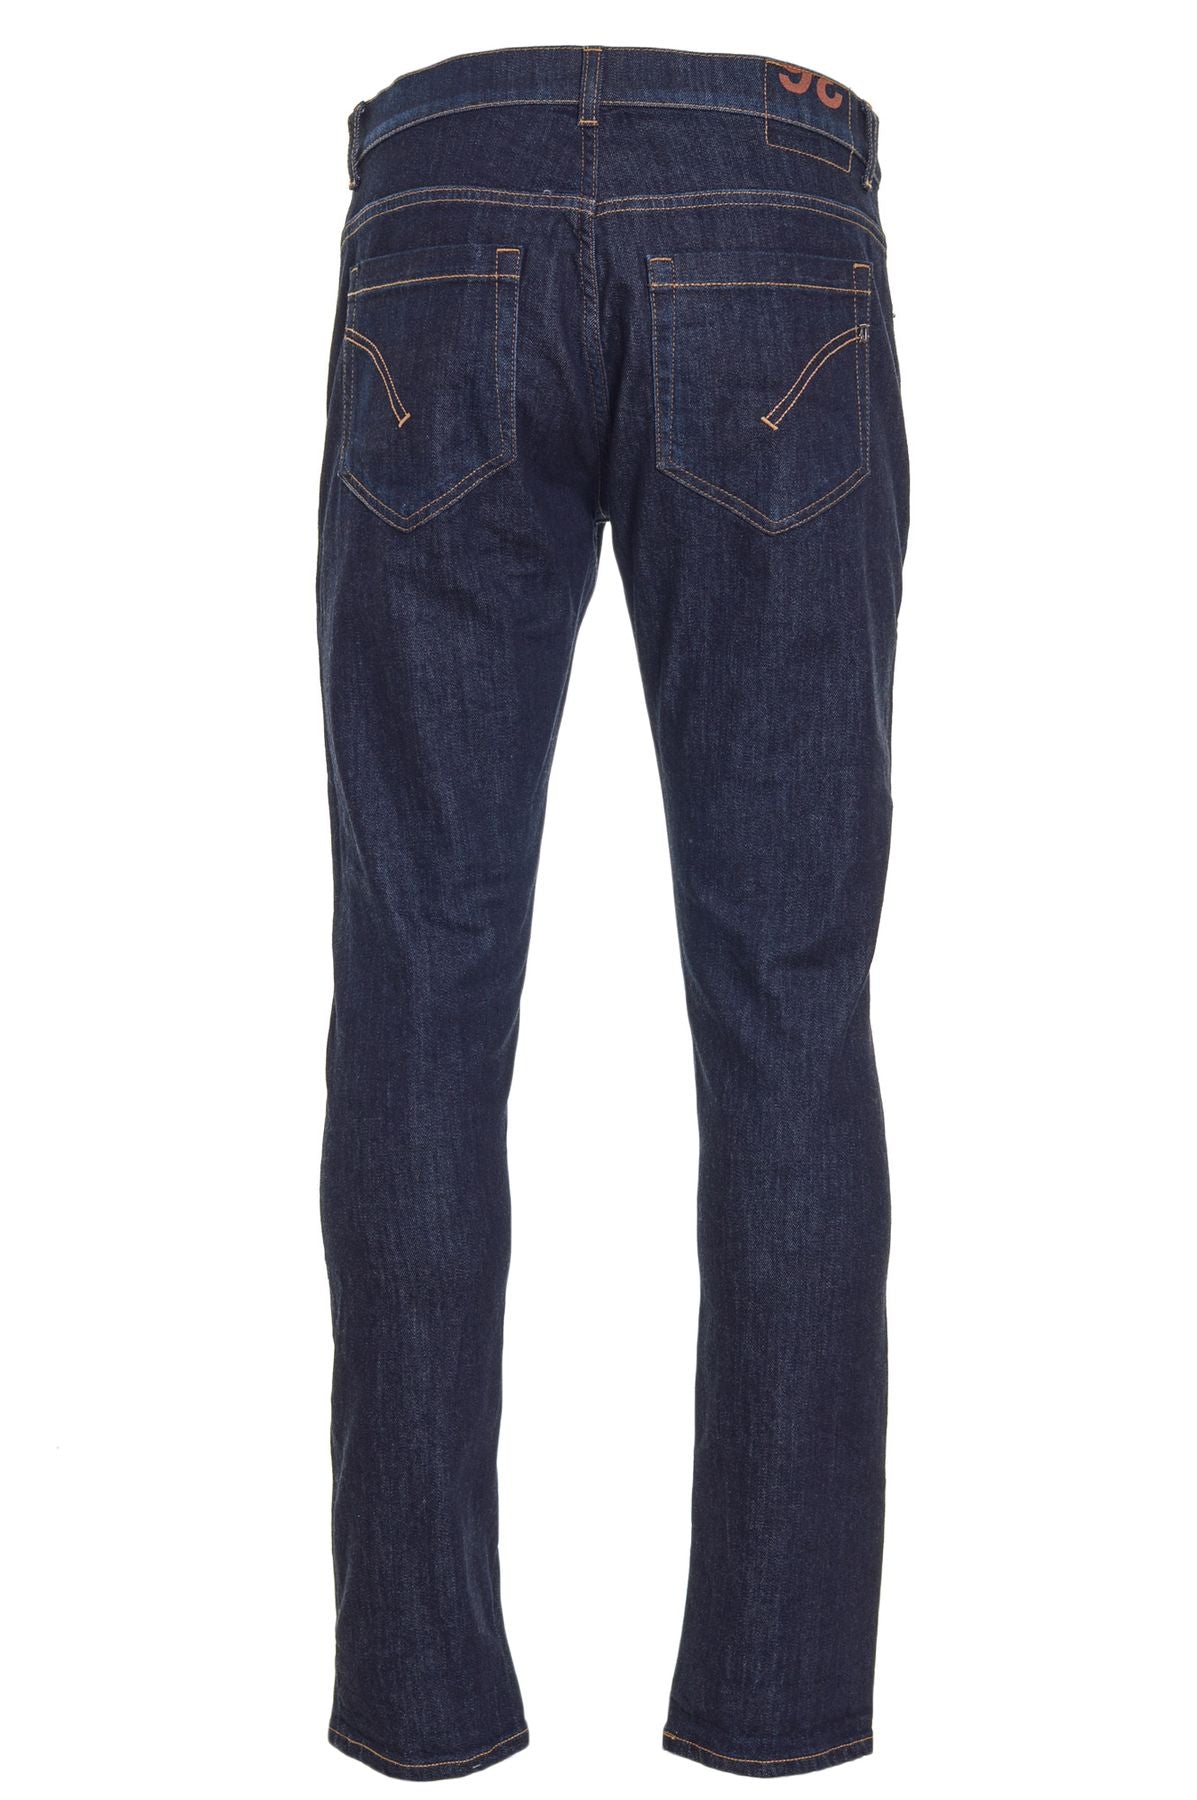 DONDUP Jeans Autunno/Inverno up232ds0325udr8